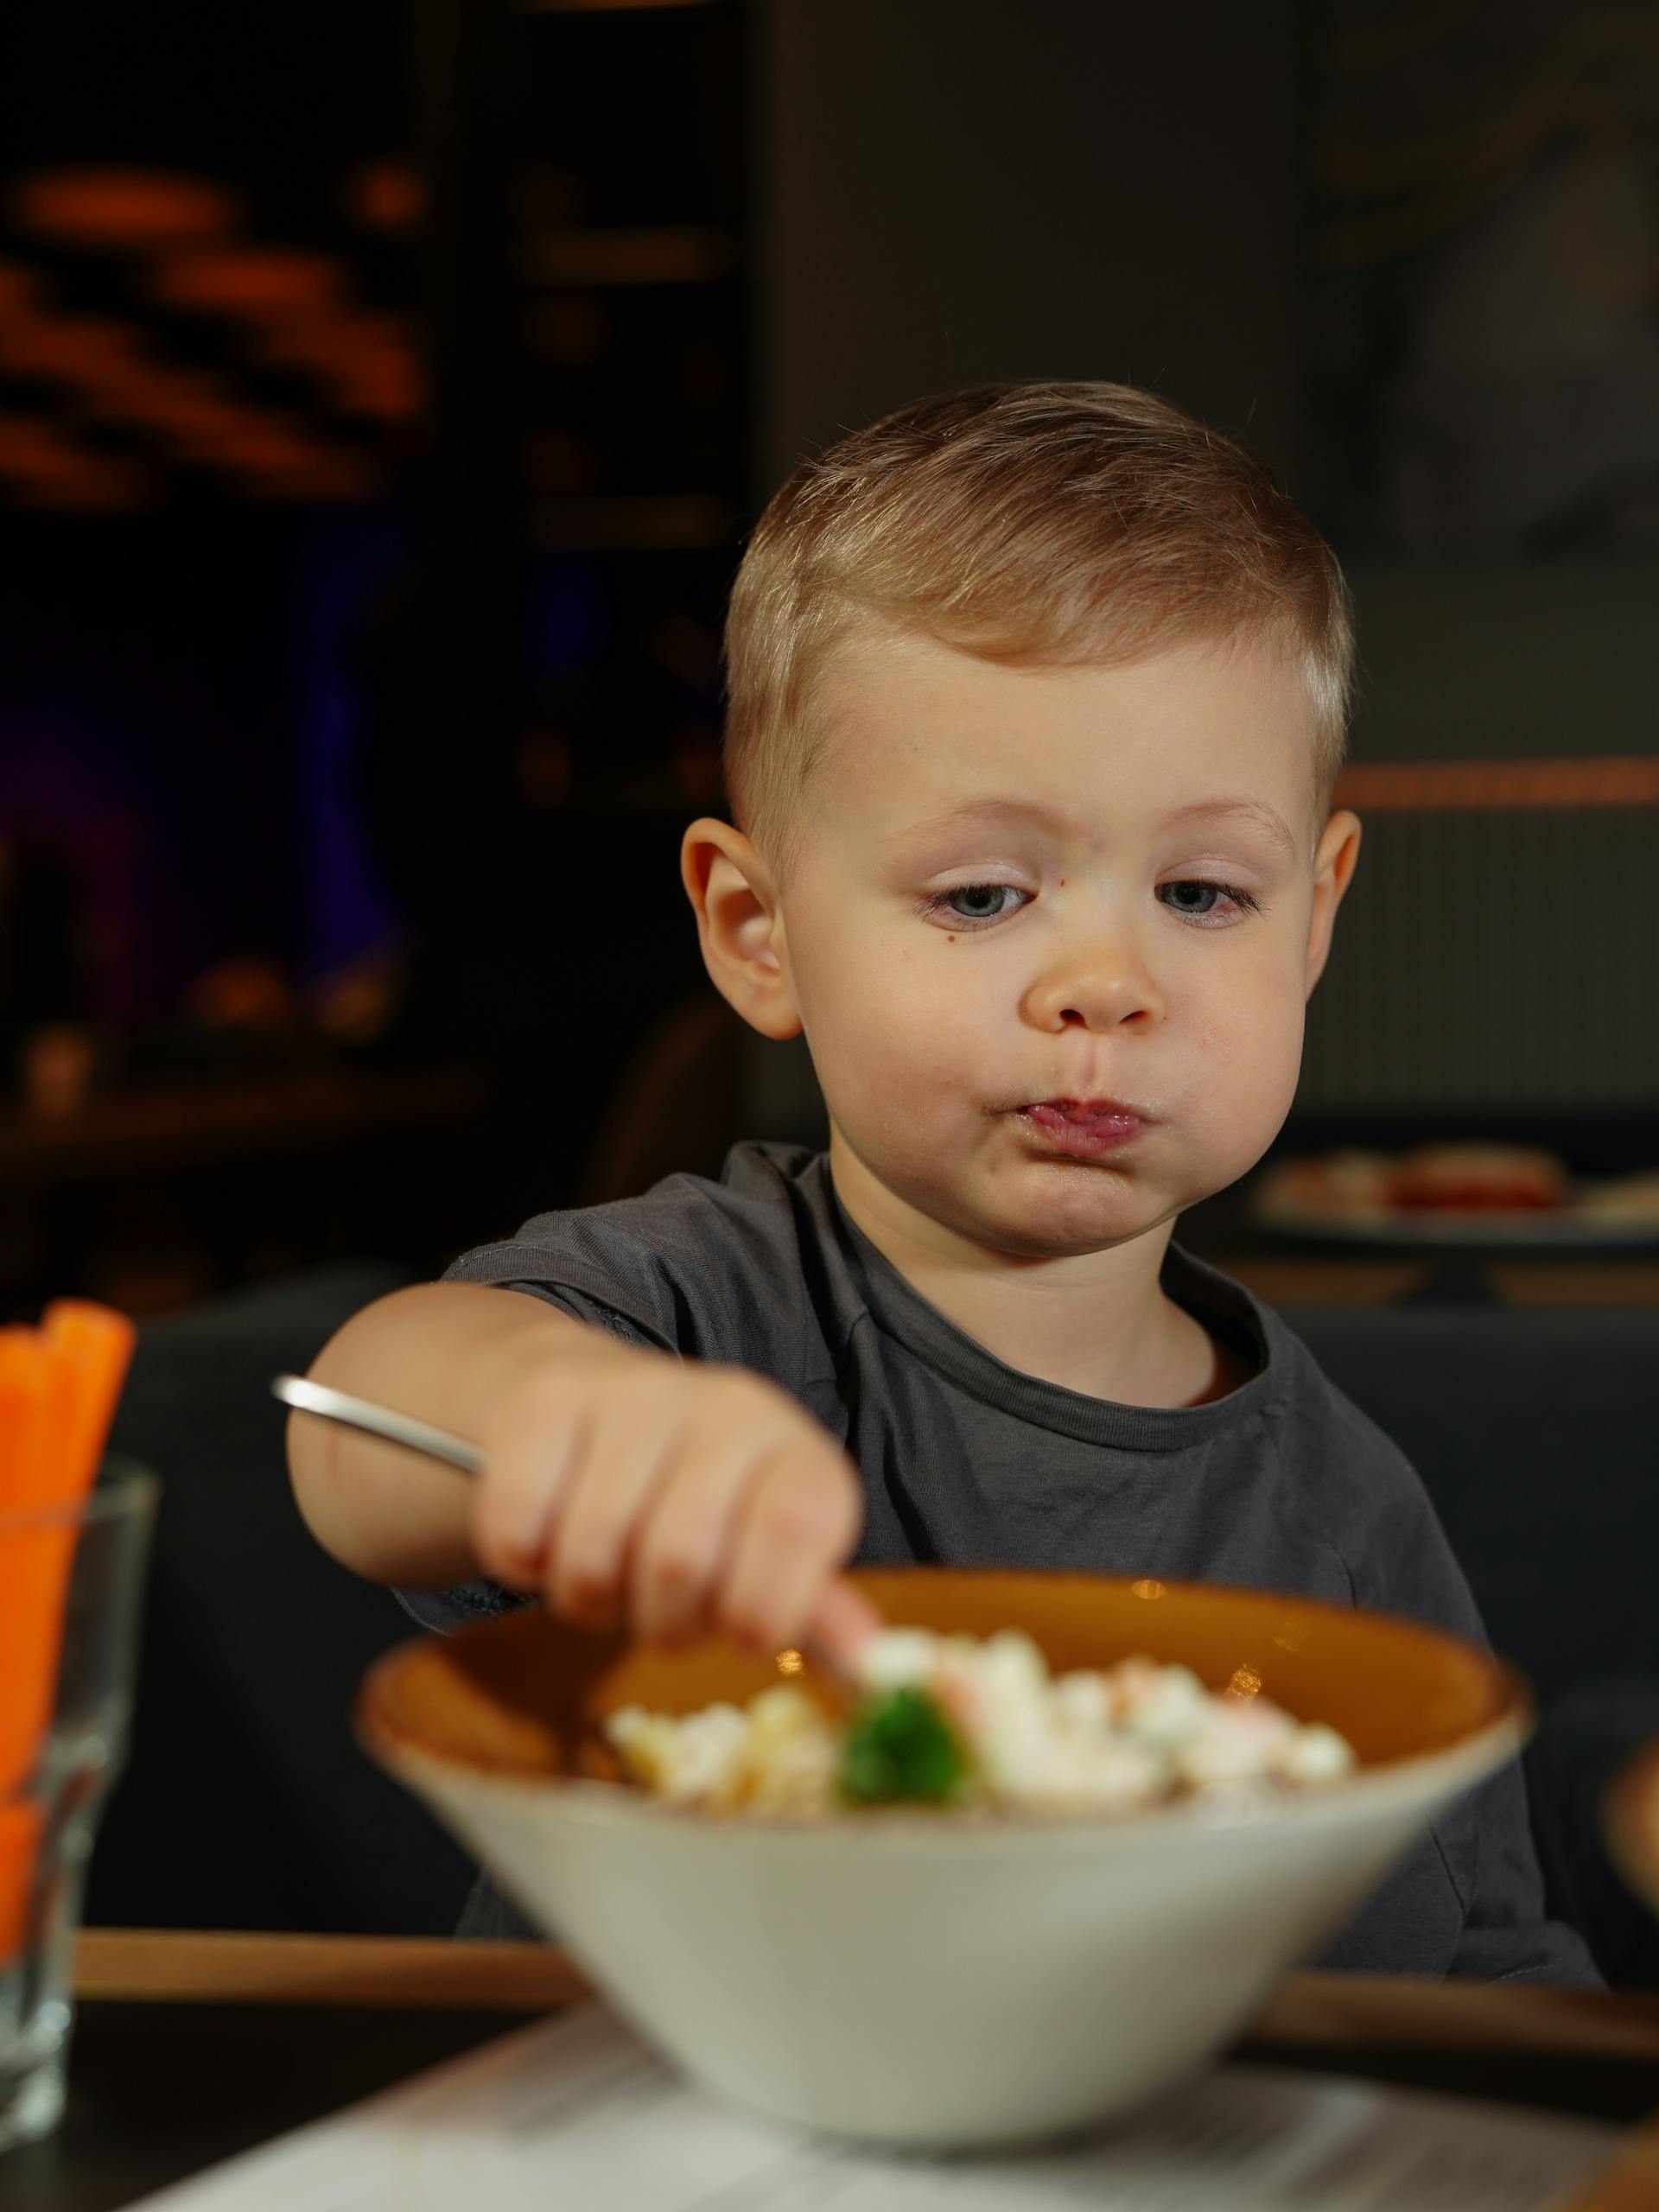 A child eating food in a restaurant | Source: Pexels